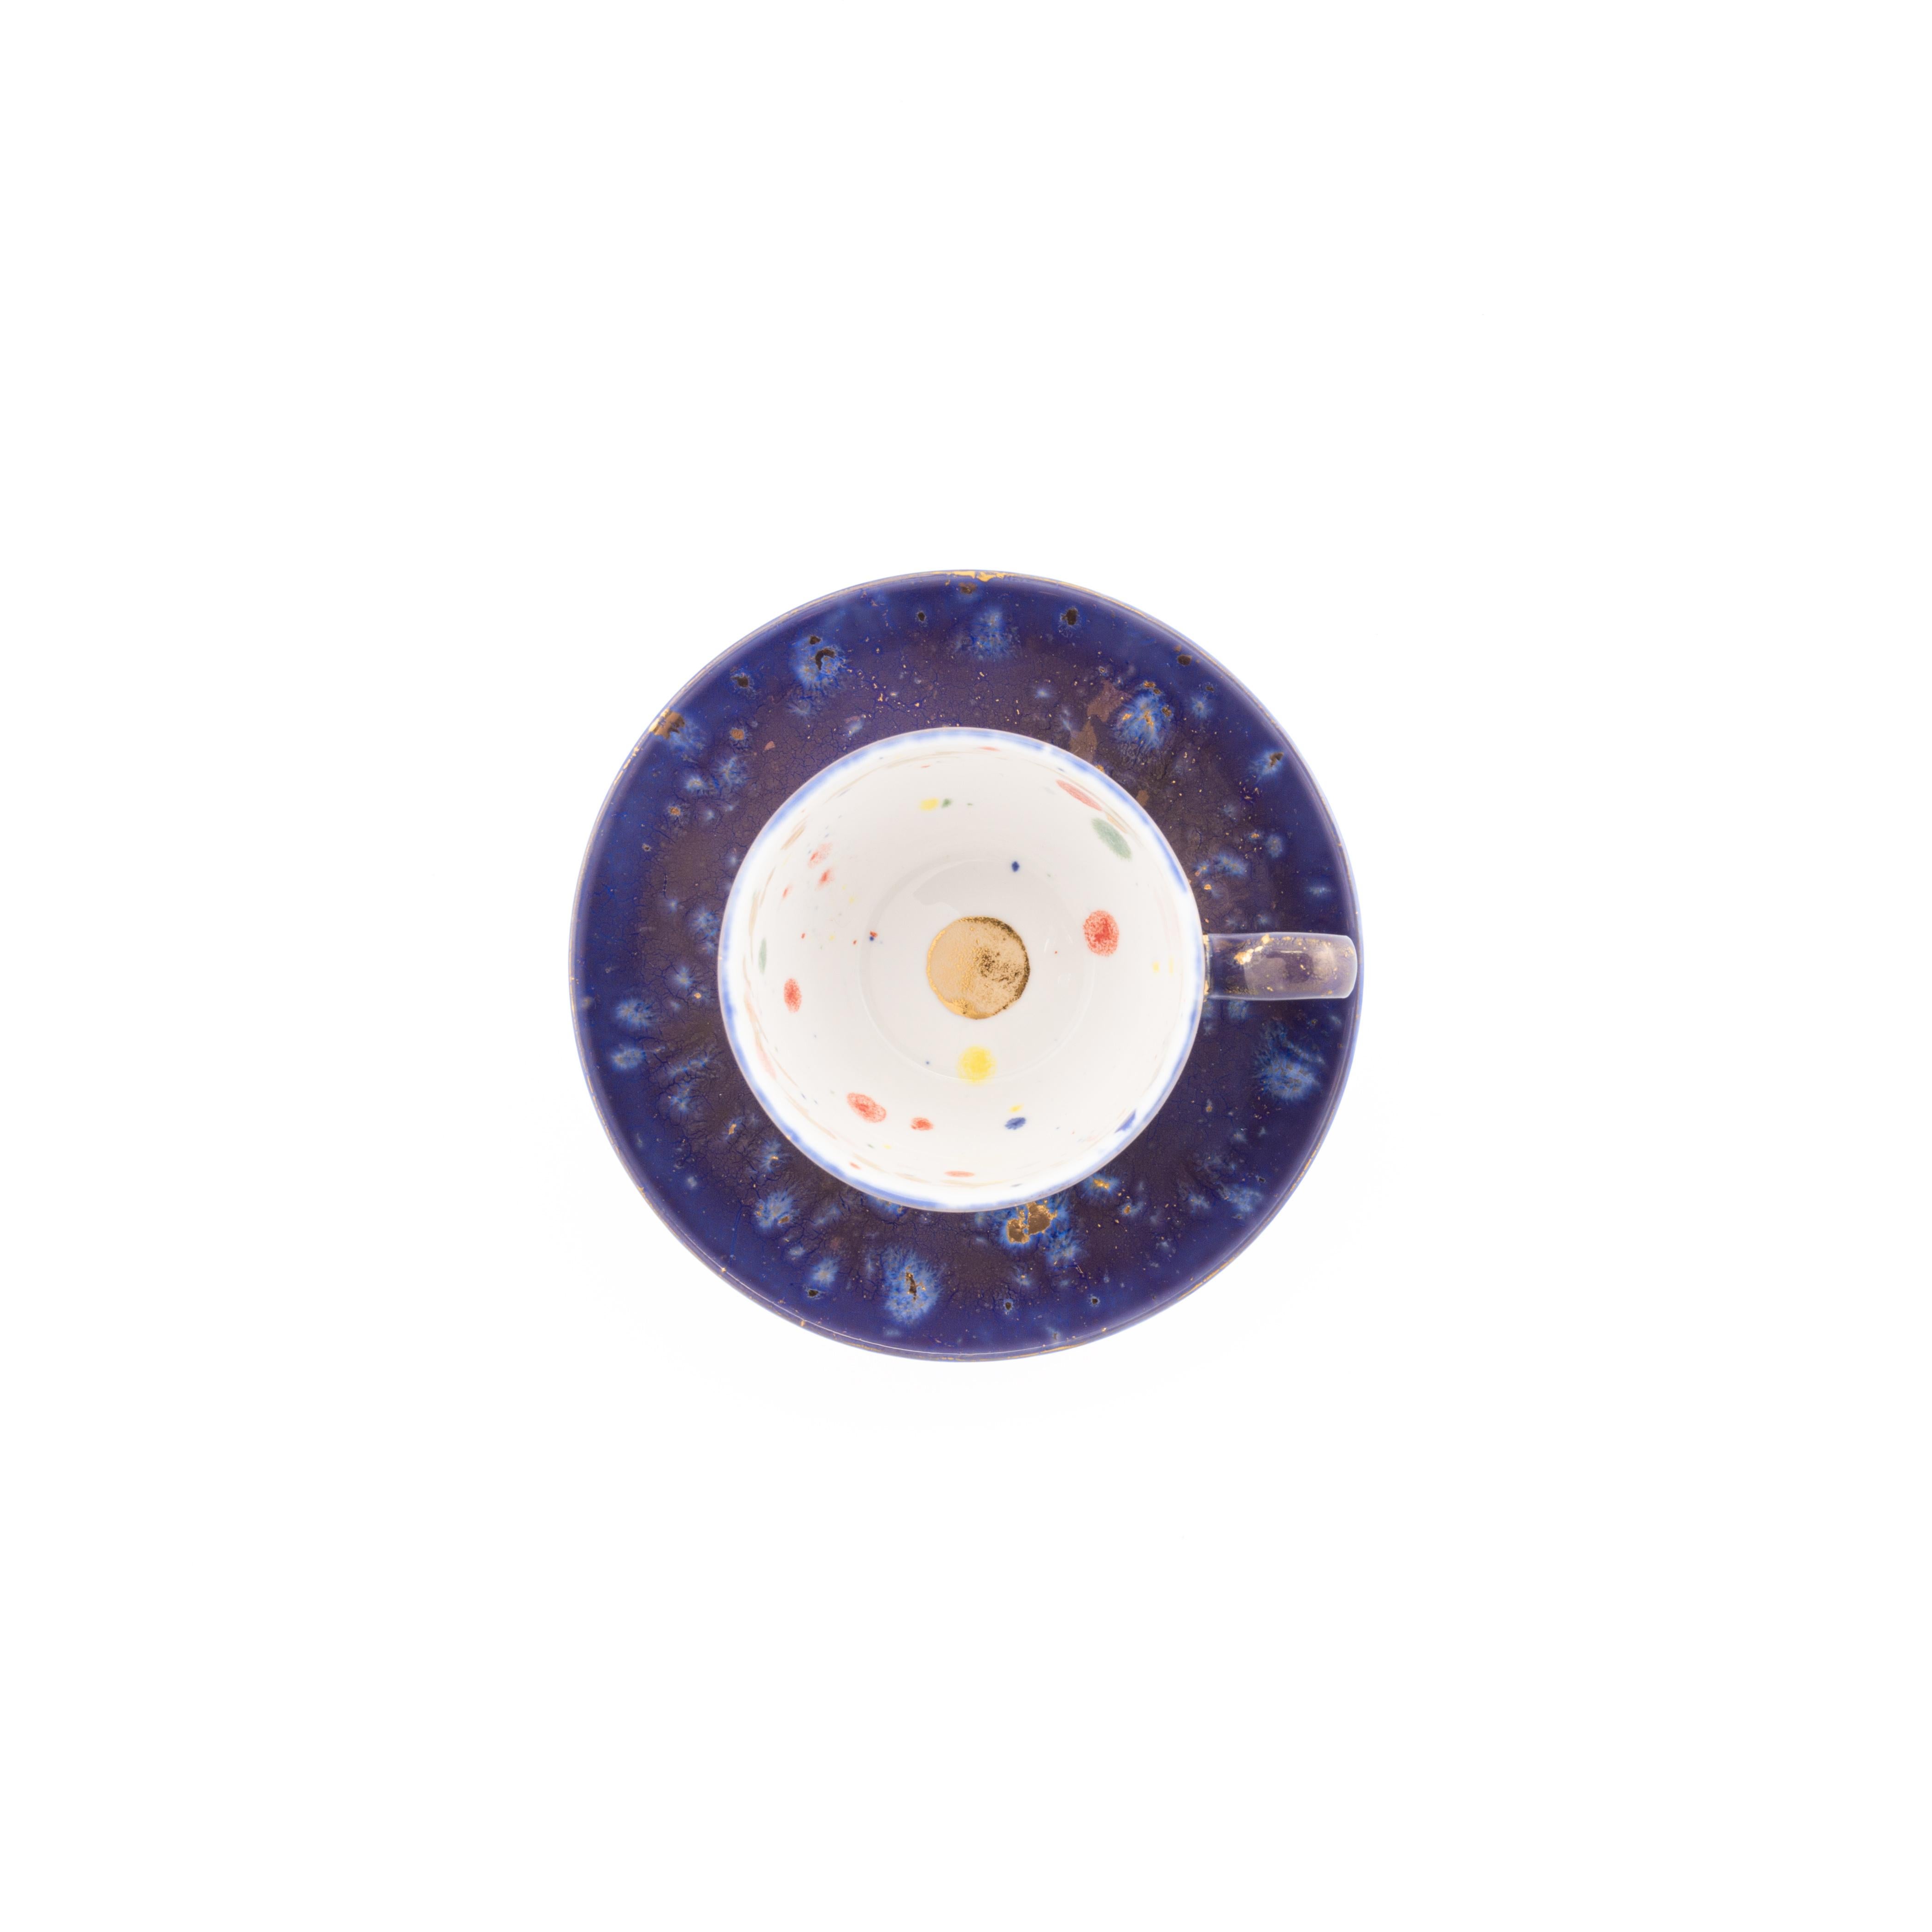 Handcrafted in Italy from the finest porcelain, this Apollo Bianco Coffee Cup & Saucer has a deep blue décor on the outside enriched by golden nuggets, like a starry night; the inside is painted in white enamel surrounded by a playful golden festoon